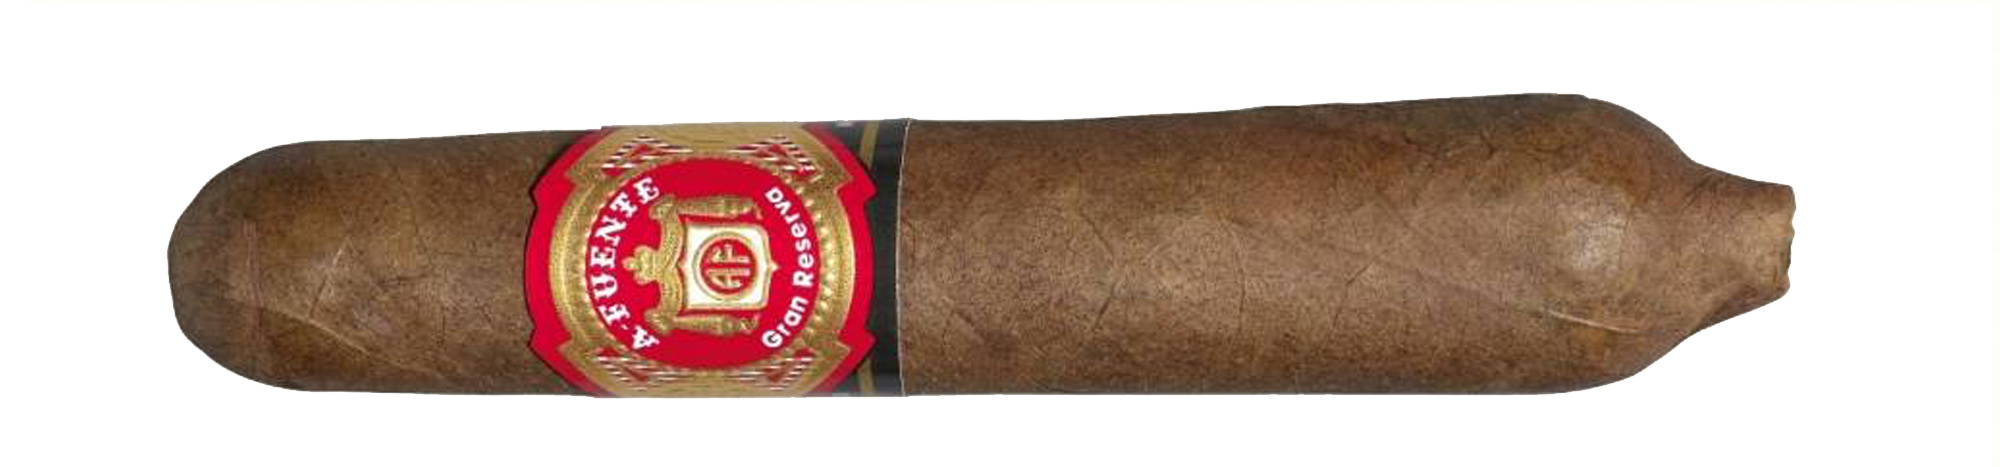 Top 5 Best Cigars for beginners 